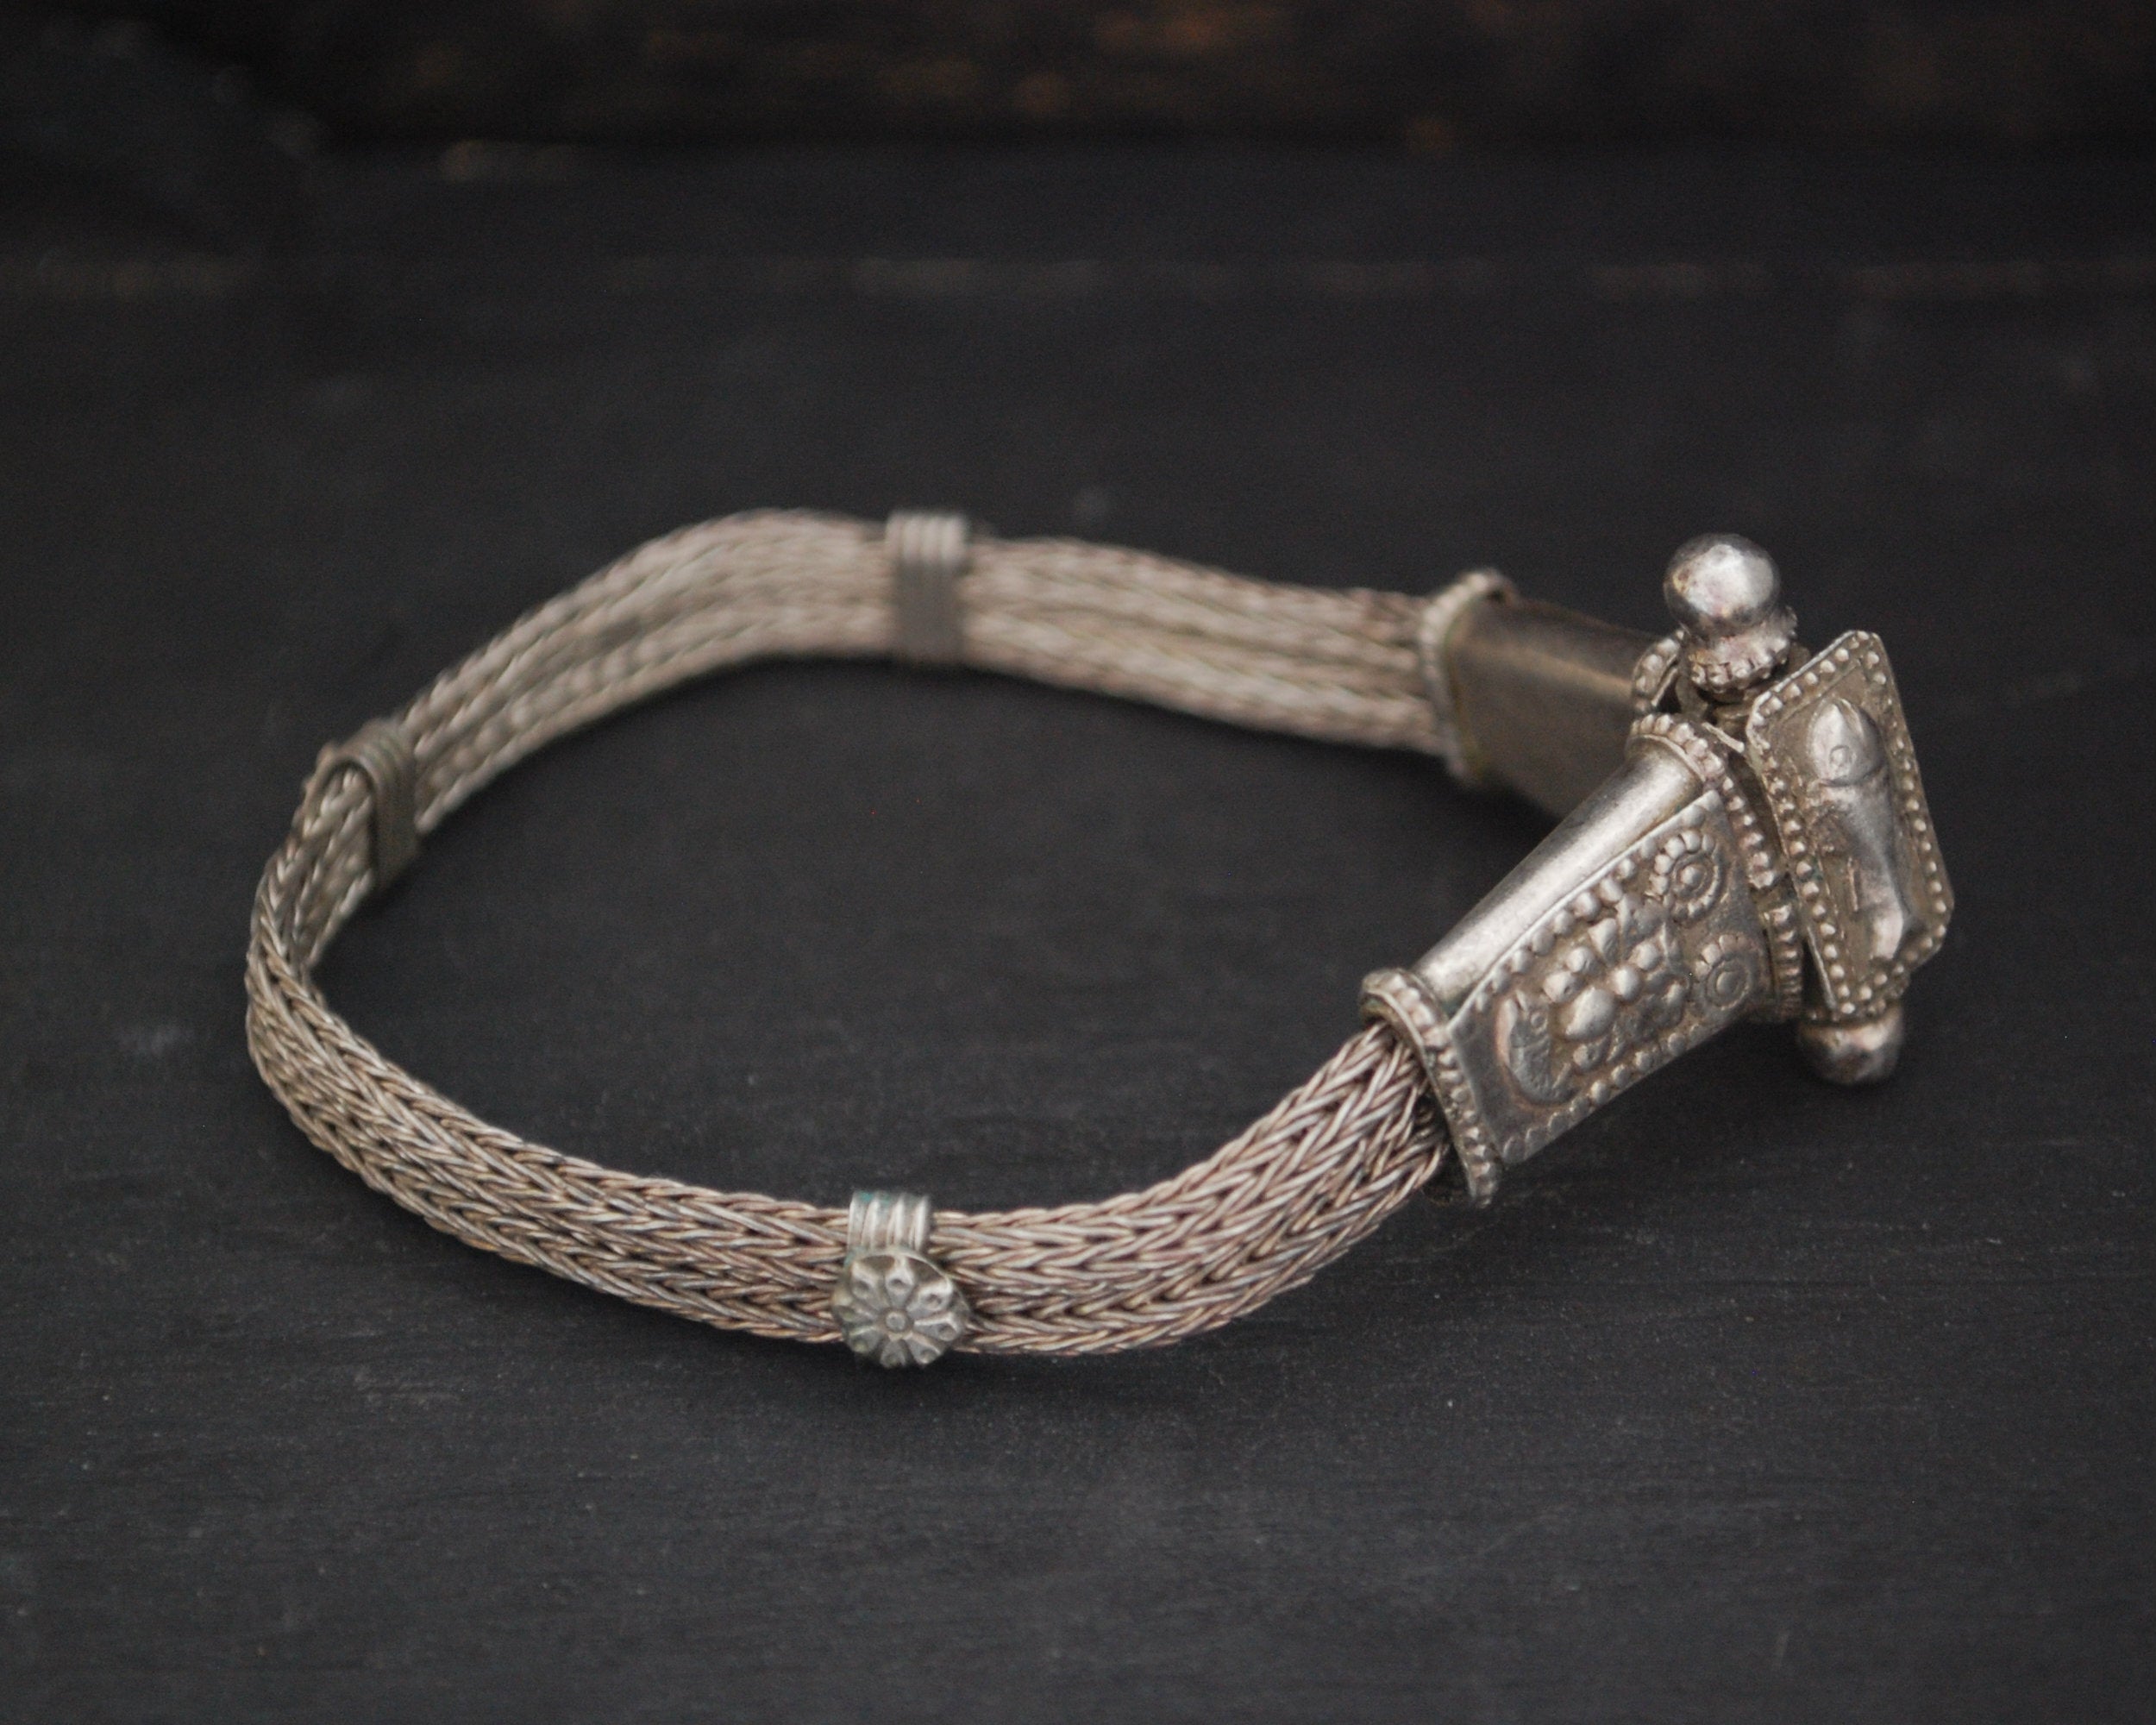 Rajasthani Snake Chain Bracelet with Fishes